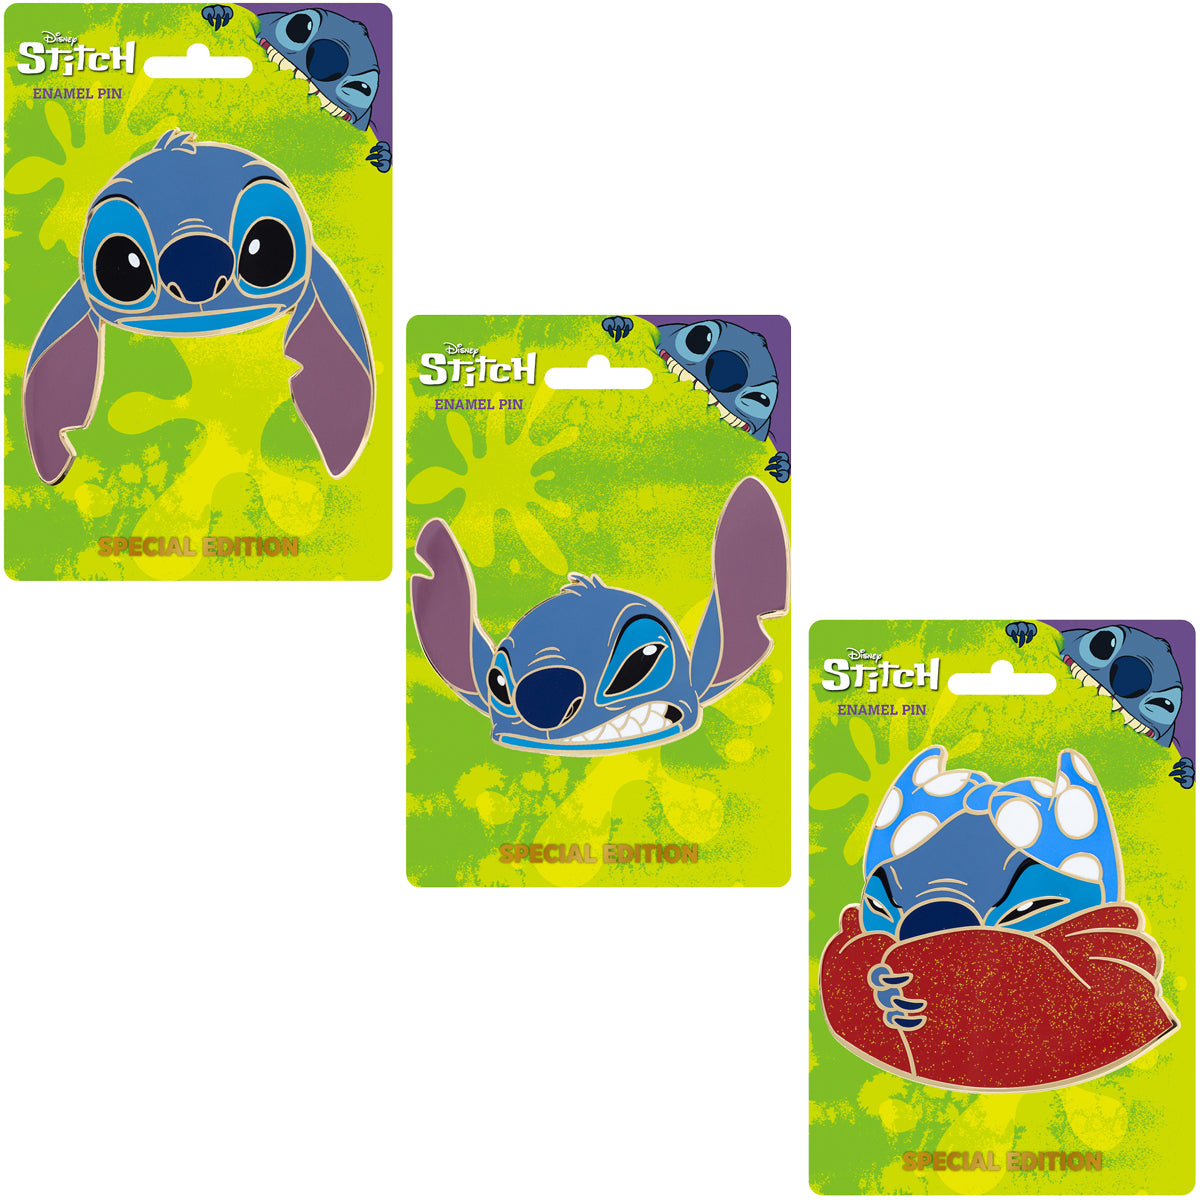 Disney Portrait Series Stitch Series 3" Special Edition 300 Pin - NEW RELEASE